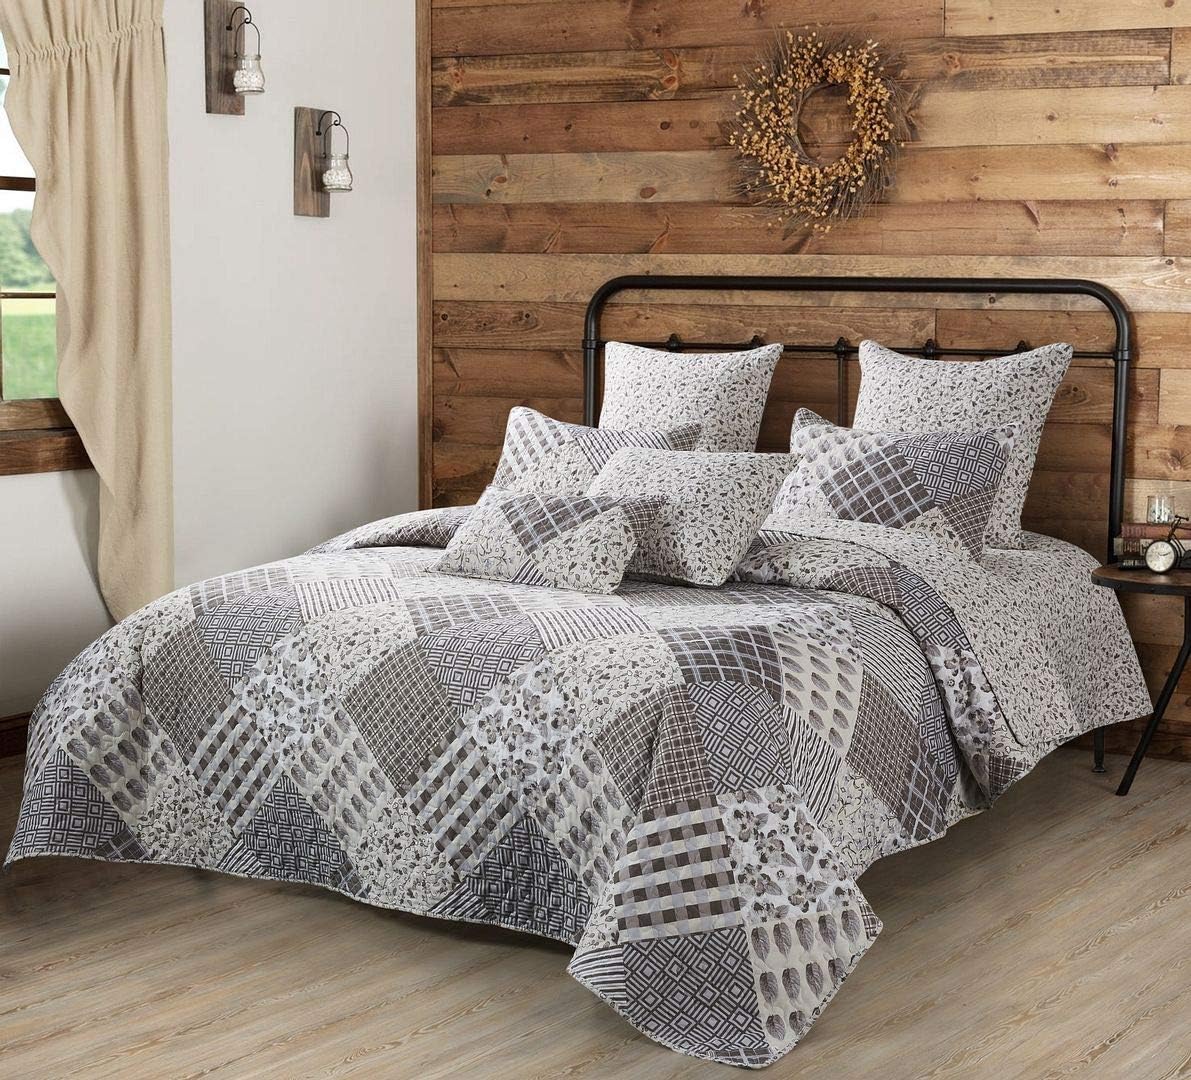 Virah Bella Quilt Bedding Set in Full/Queen Phyllis Dobbs Charming Grays Printed Lightweight Reversible Quilt with 2 Matching Pillow Shams - Cozy & Beautiful Contemporary-Themed Bedding